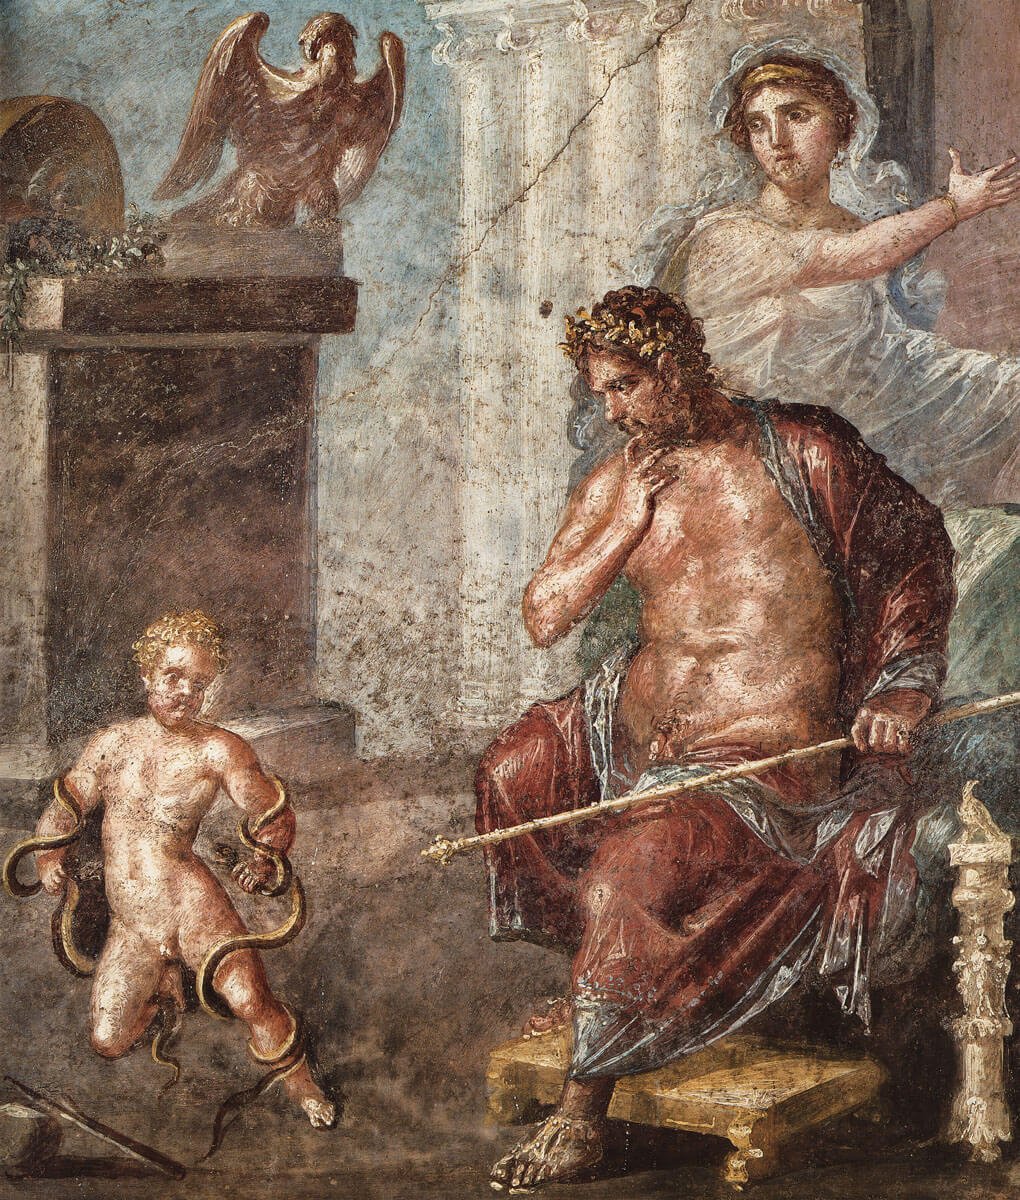 This Roman fresco represents little Heracles strangling the snakes of Hera before the eyes of his parents.